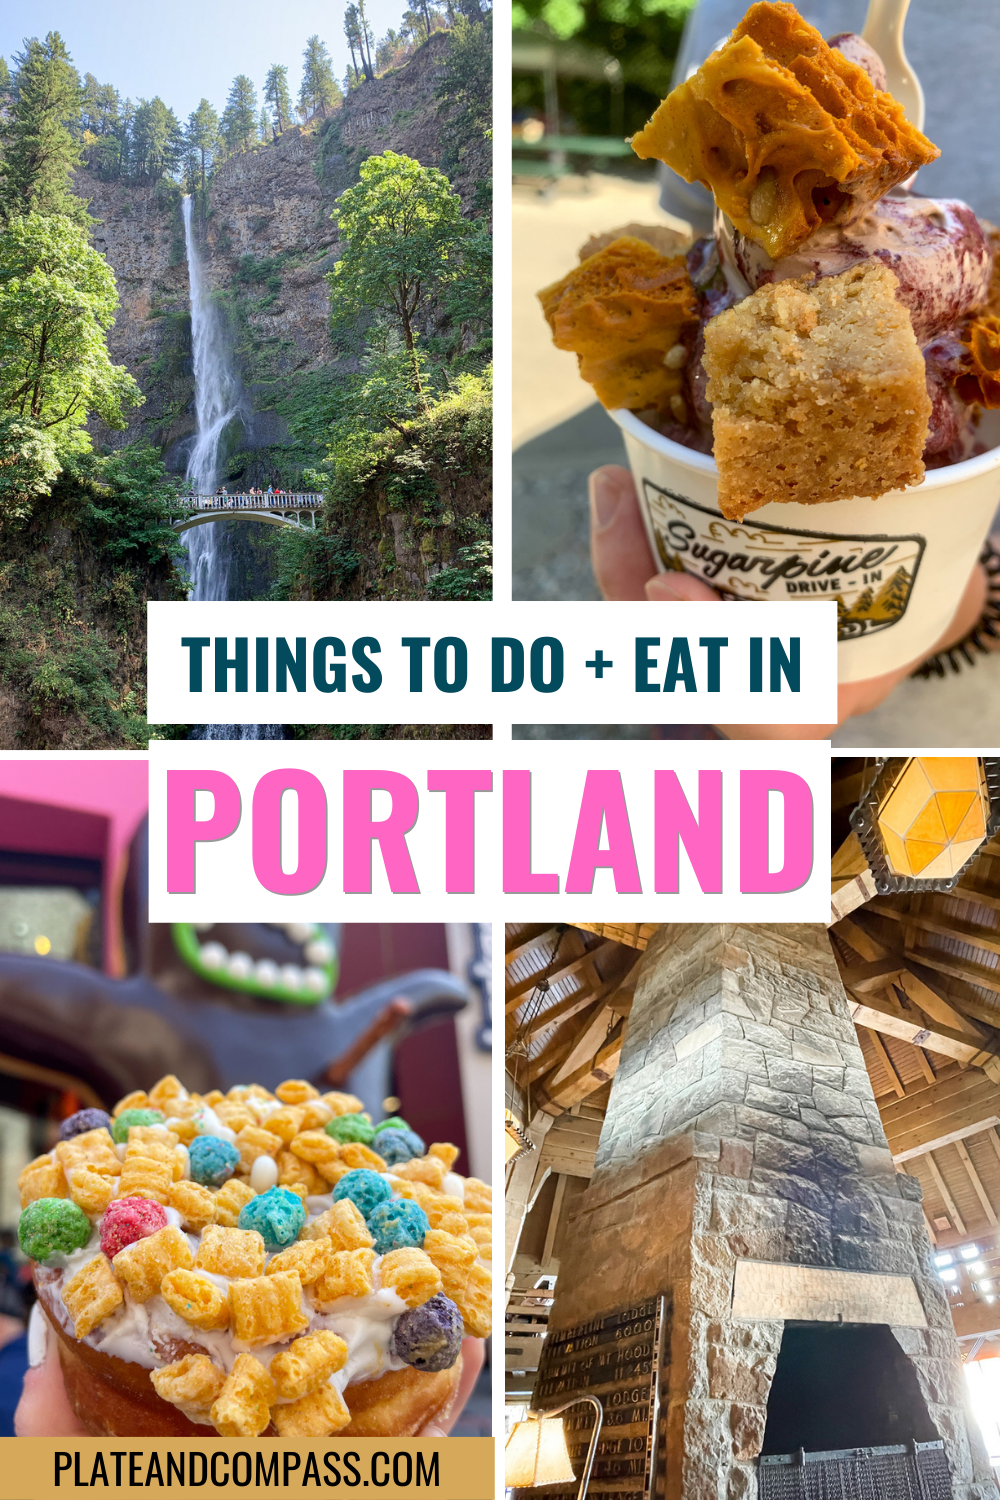 Things to Do + Eat in Portland